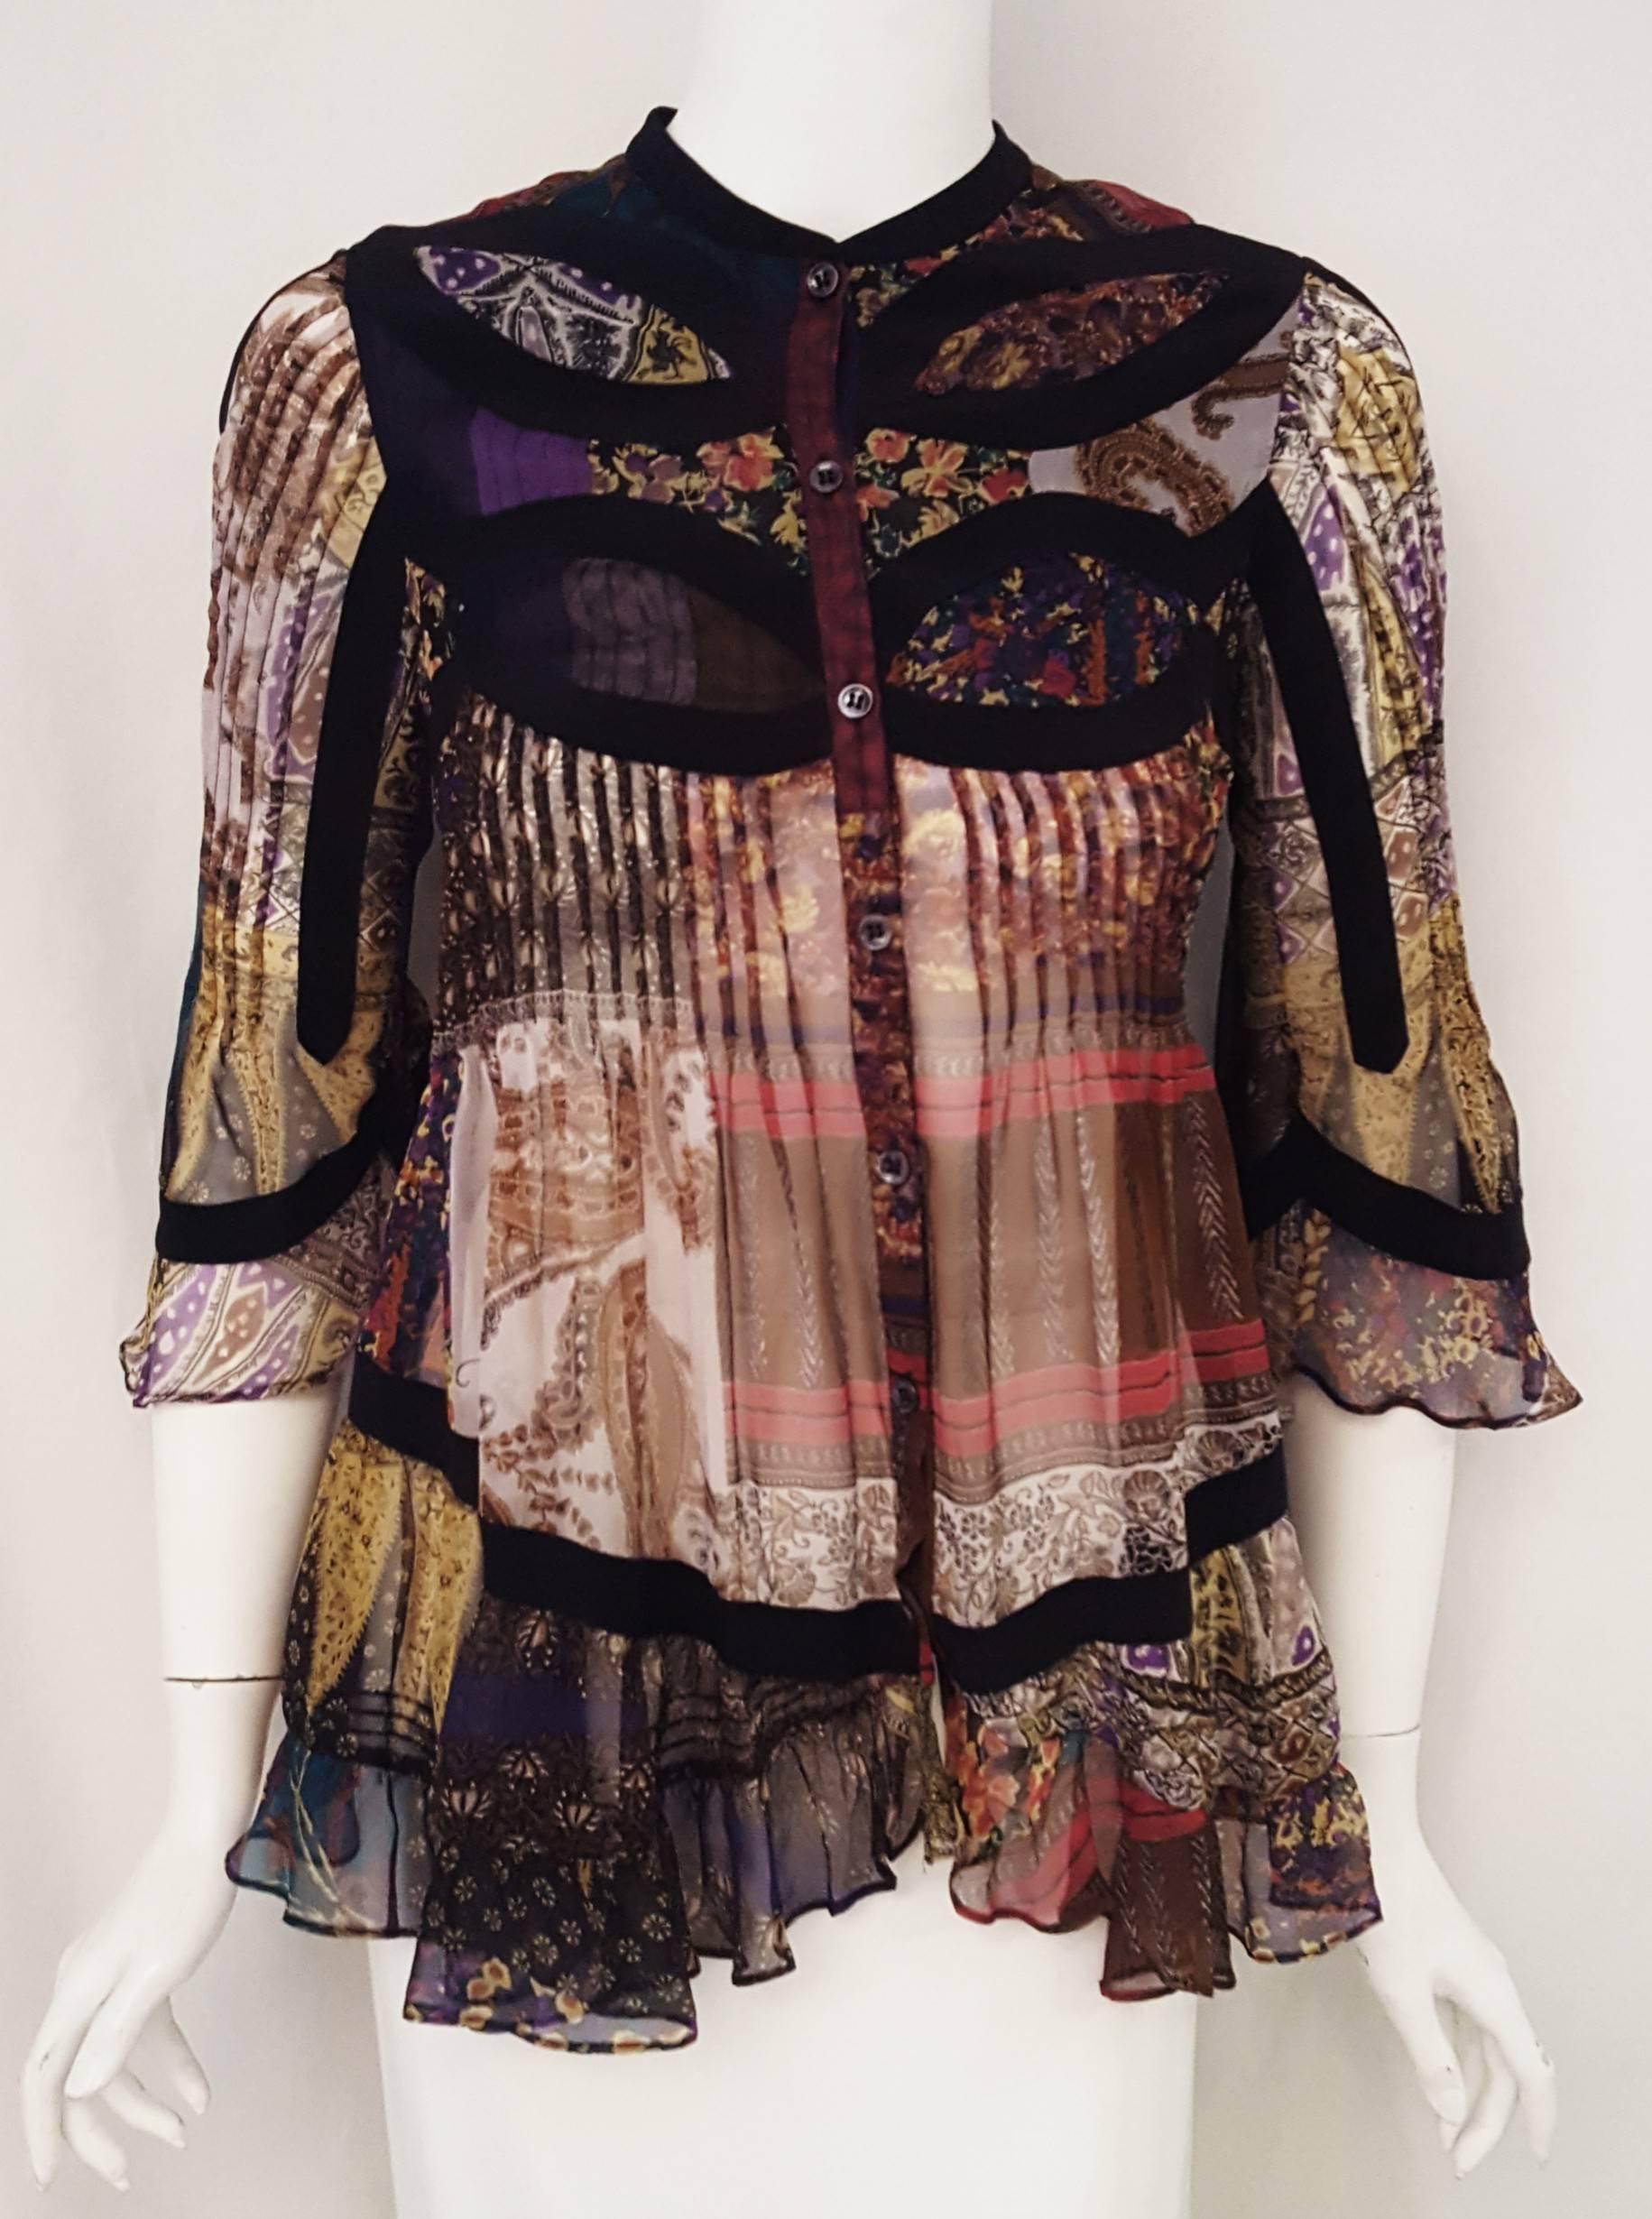 Etro blouse crafted from lightweight silk is colorful with high contrasting prints throughout.  This intricate design with black silk decorative inserts on the sleeves, upper chest and upper back and waistline area gives this top an eye catching